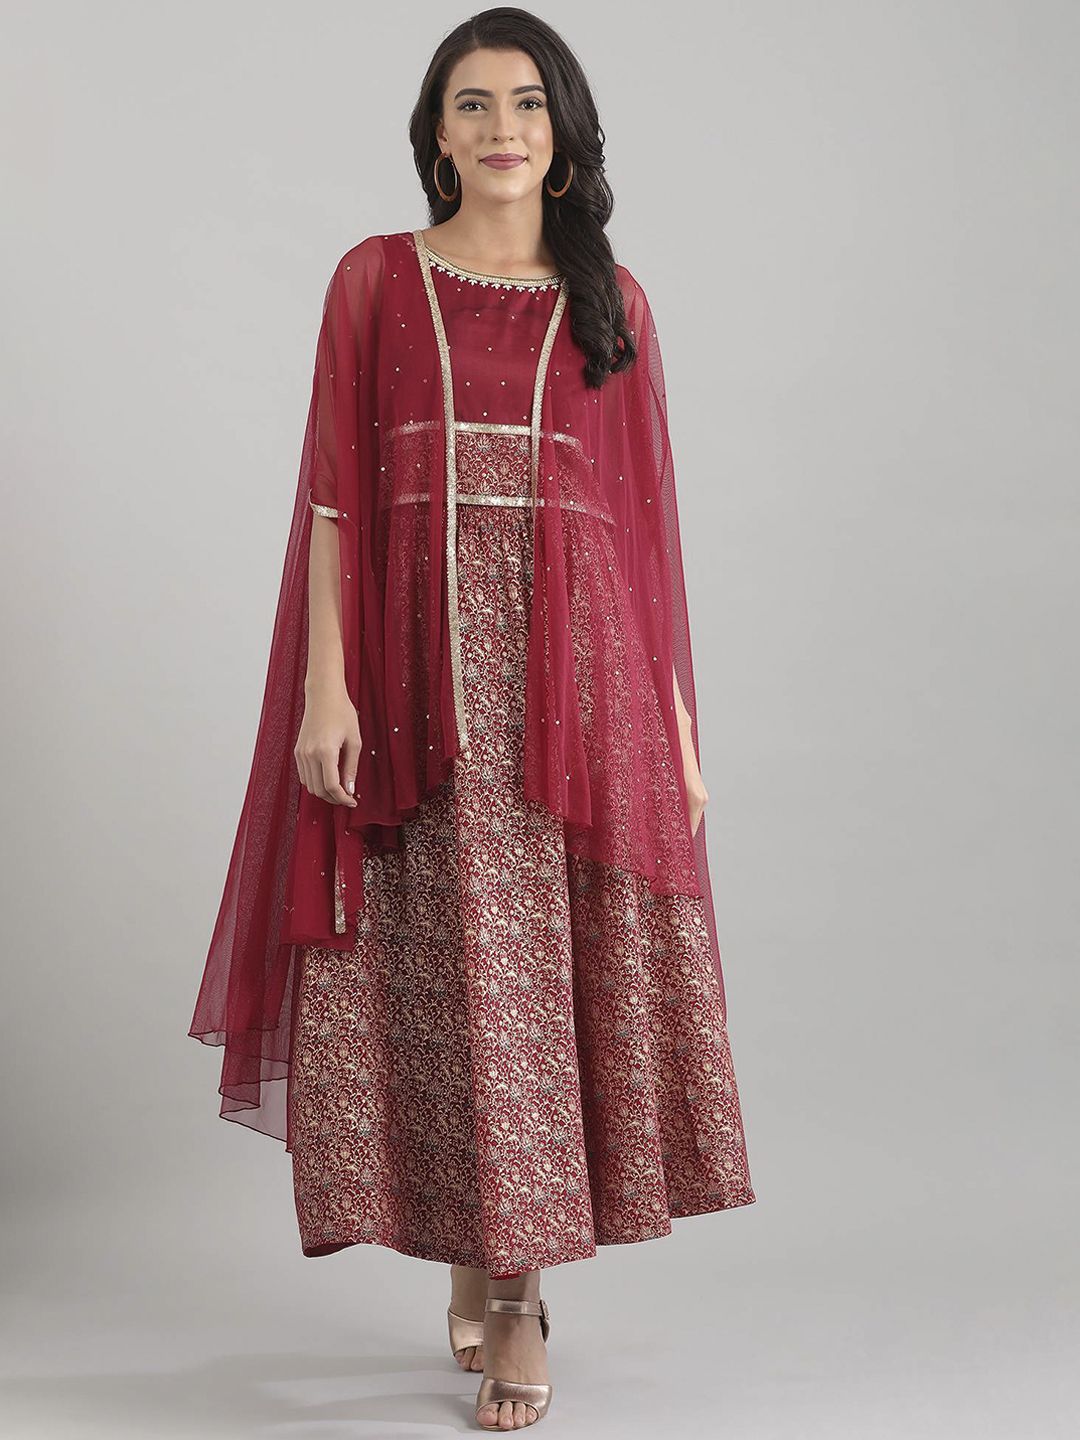 AURELIA Women Maroon & Gold-Toned Printed Top with Skirt Price in India